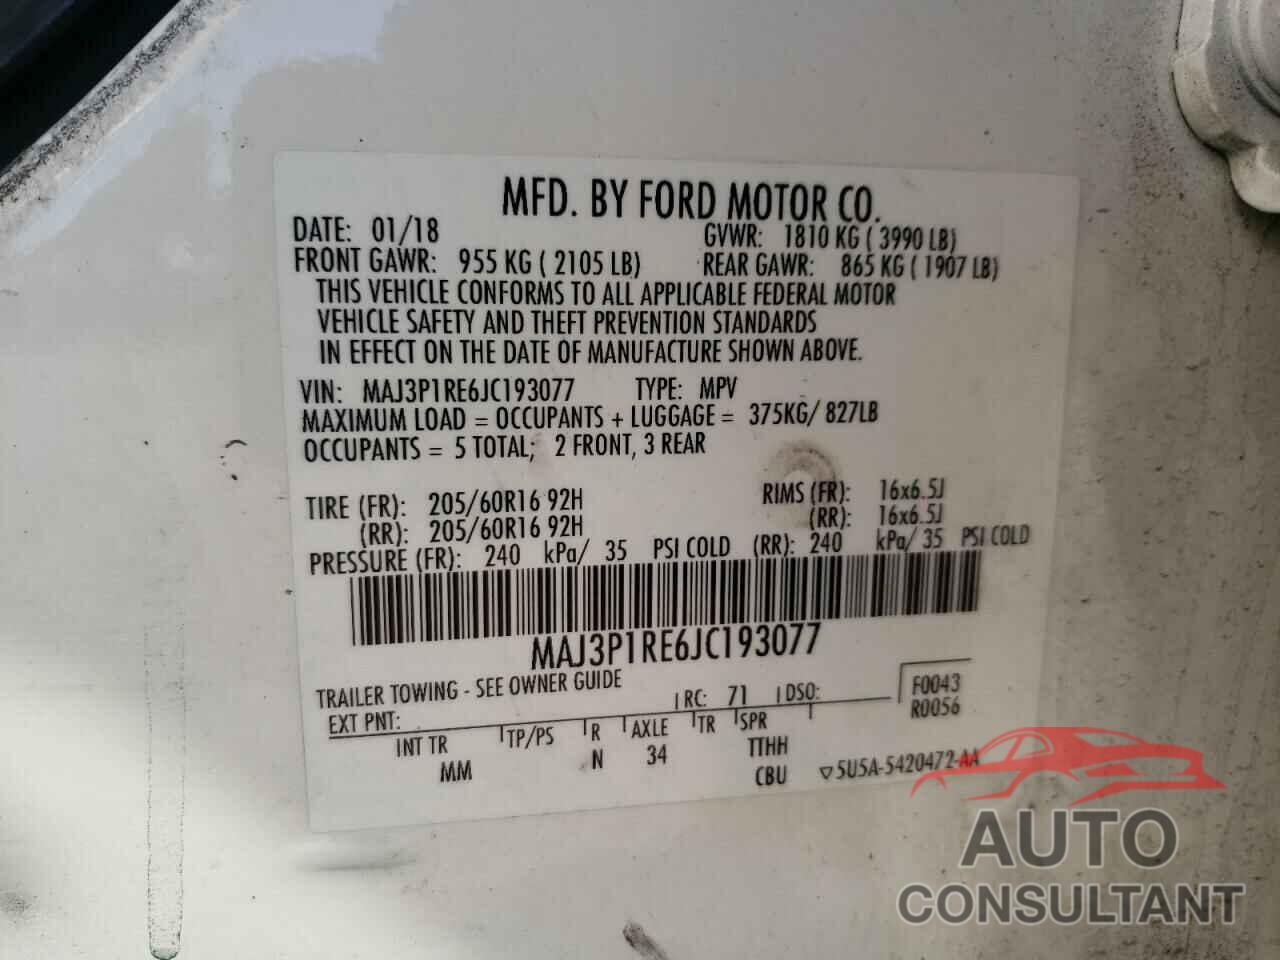 FORD ALL OTHER 2018 - MAJ3P1RE6JC193077